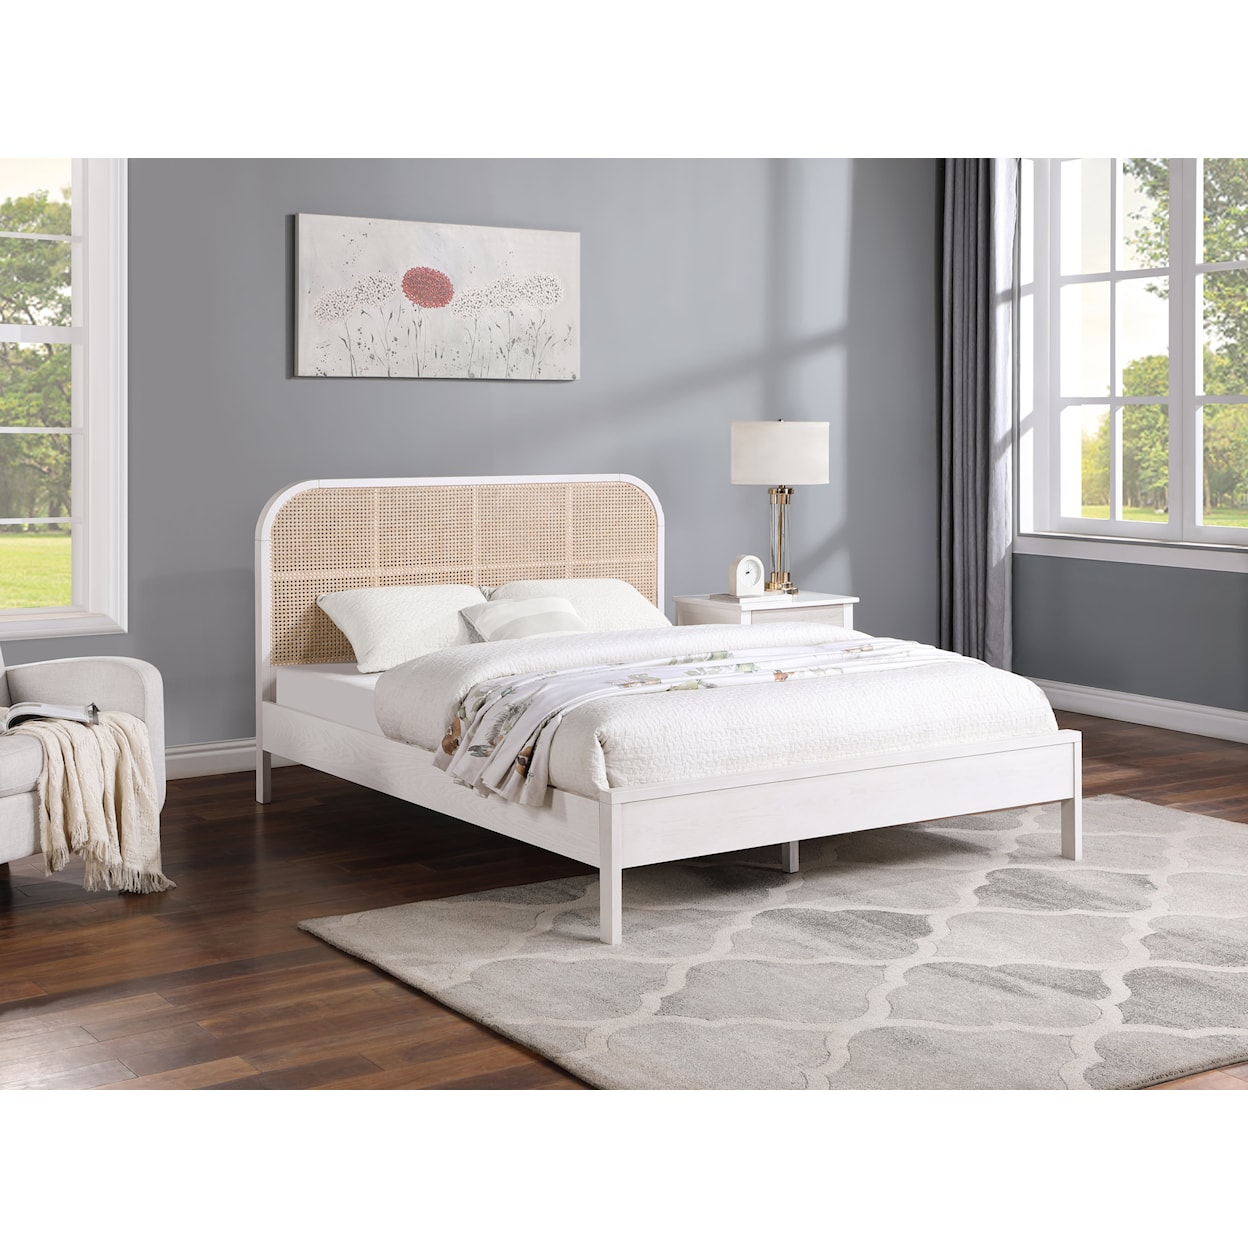 Meridian Furniture Siena Queen Bed (3 Boxes)